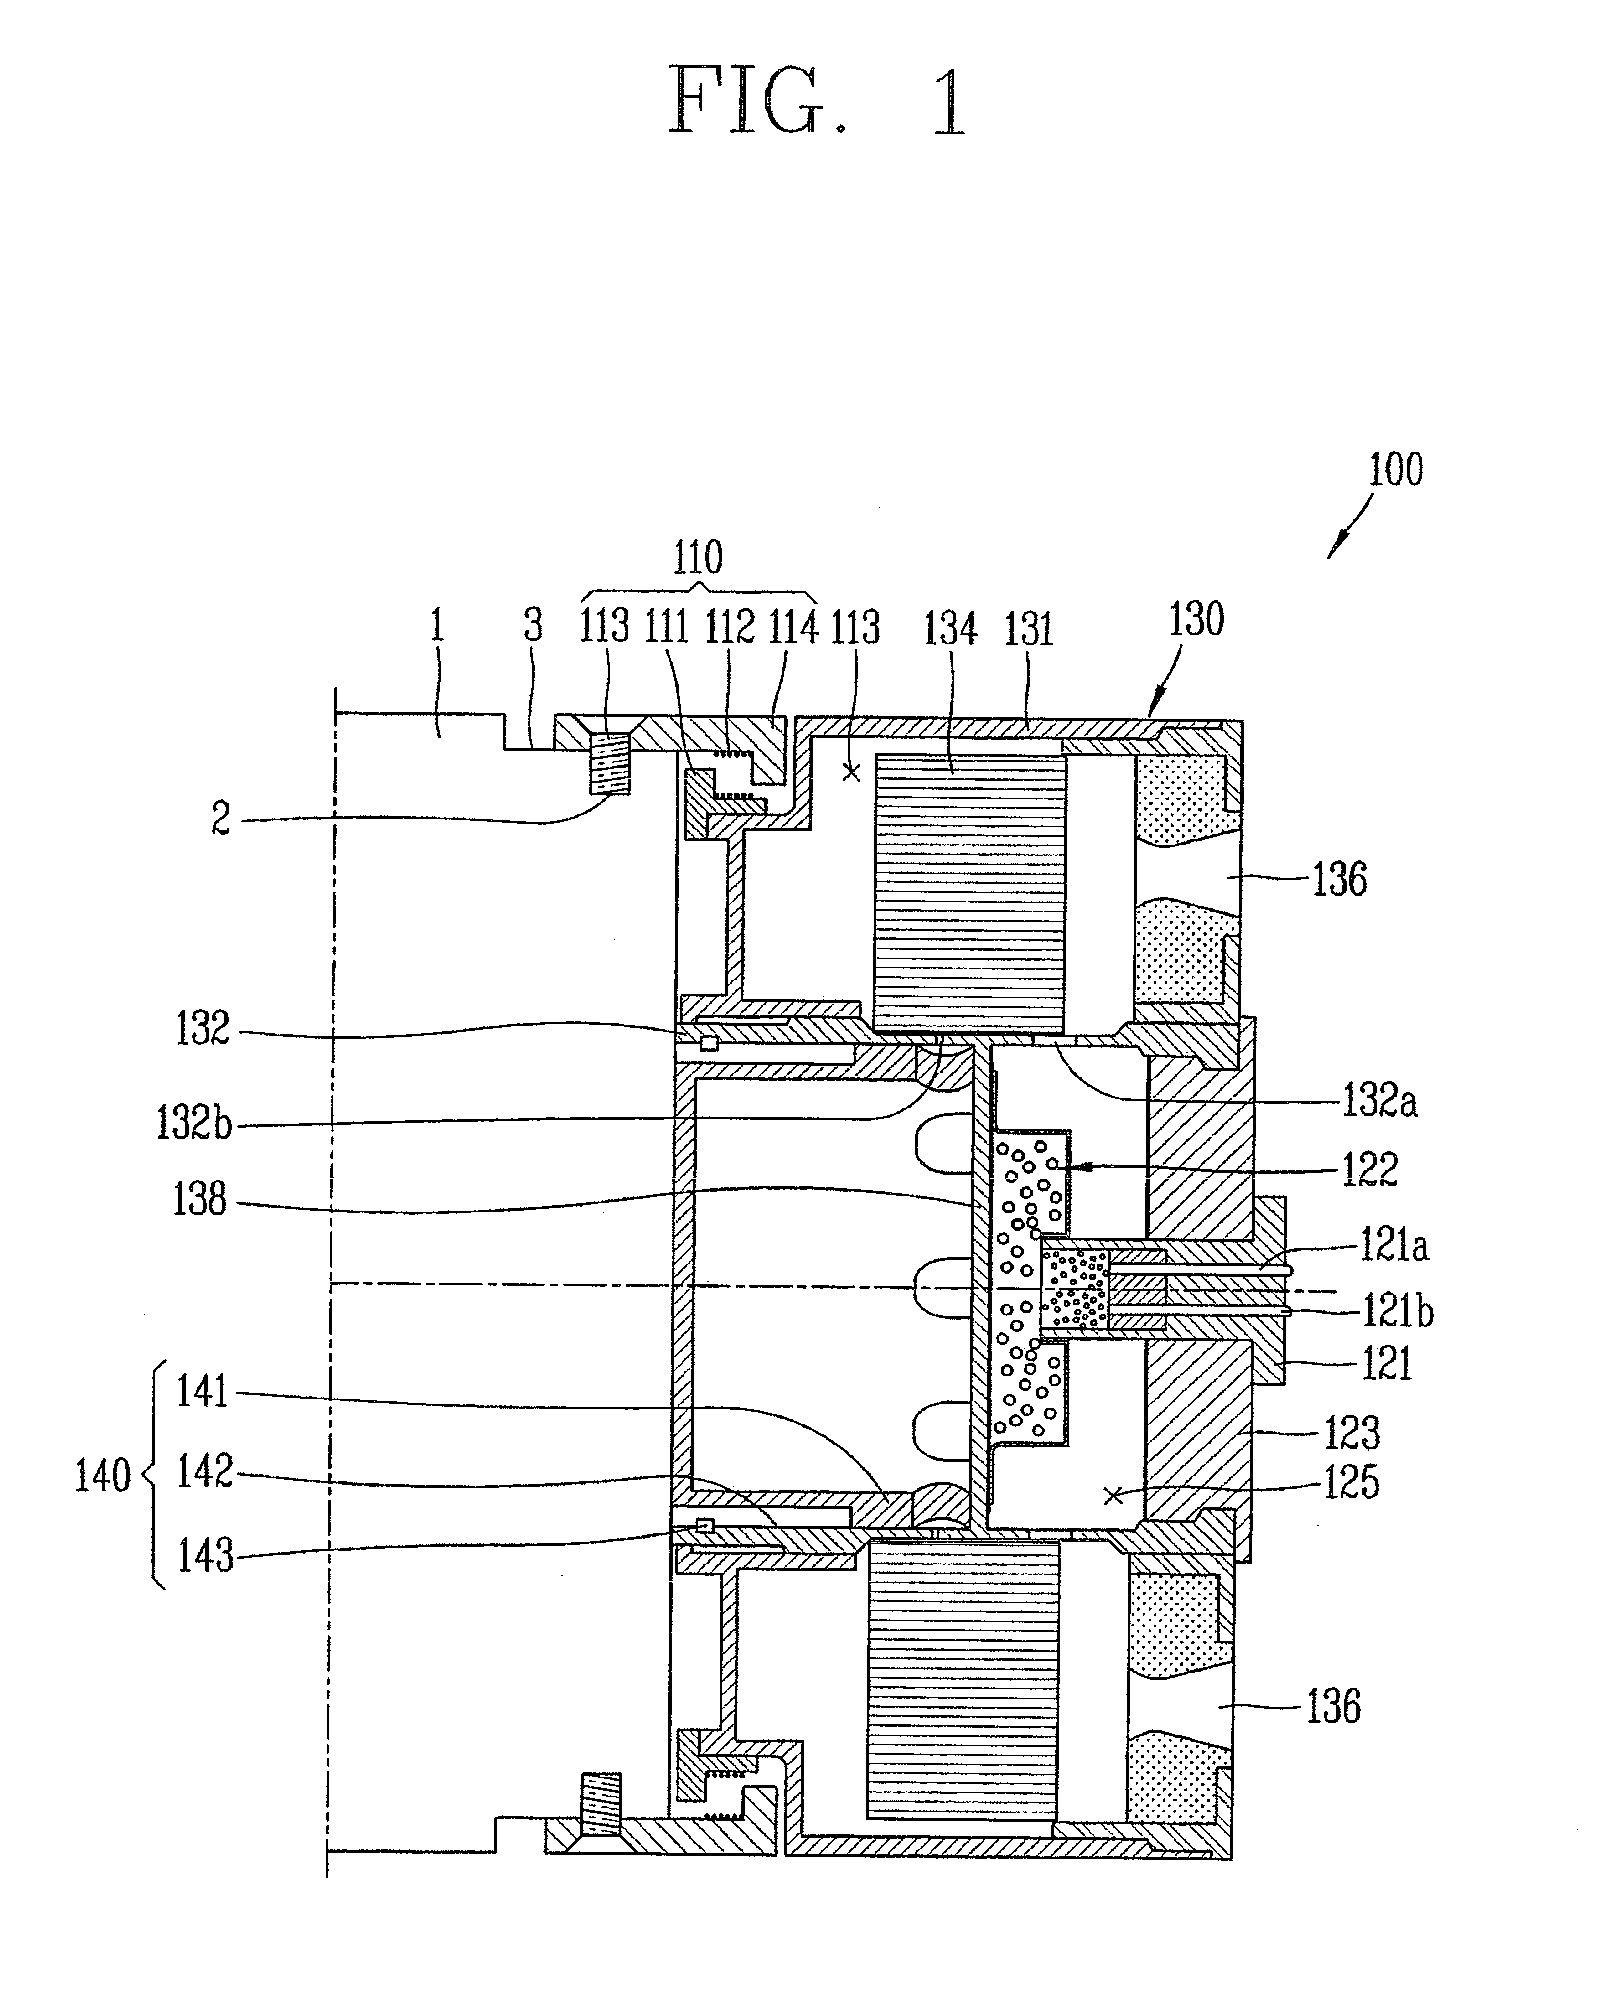 Separation device of ejector motor for portable missile